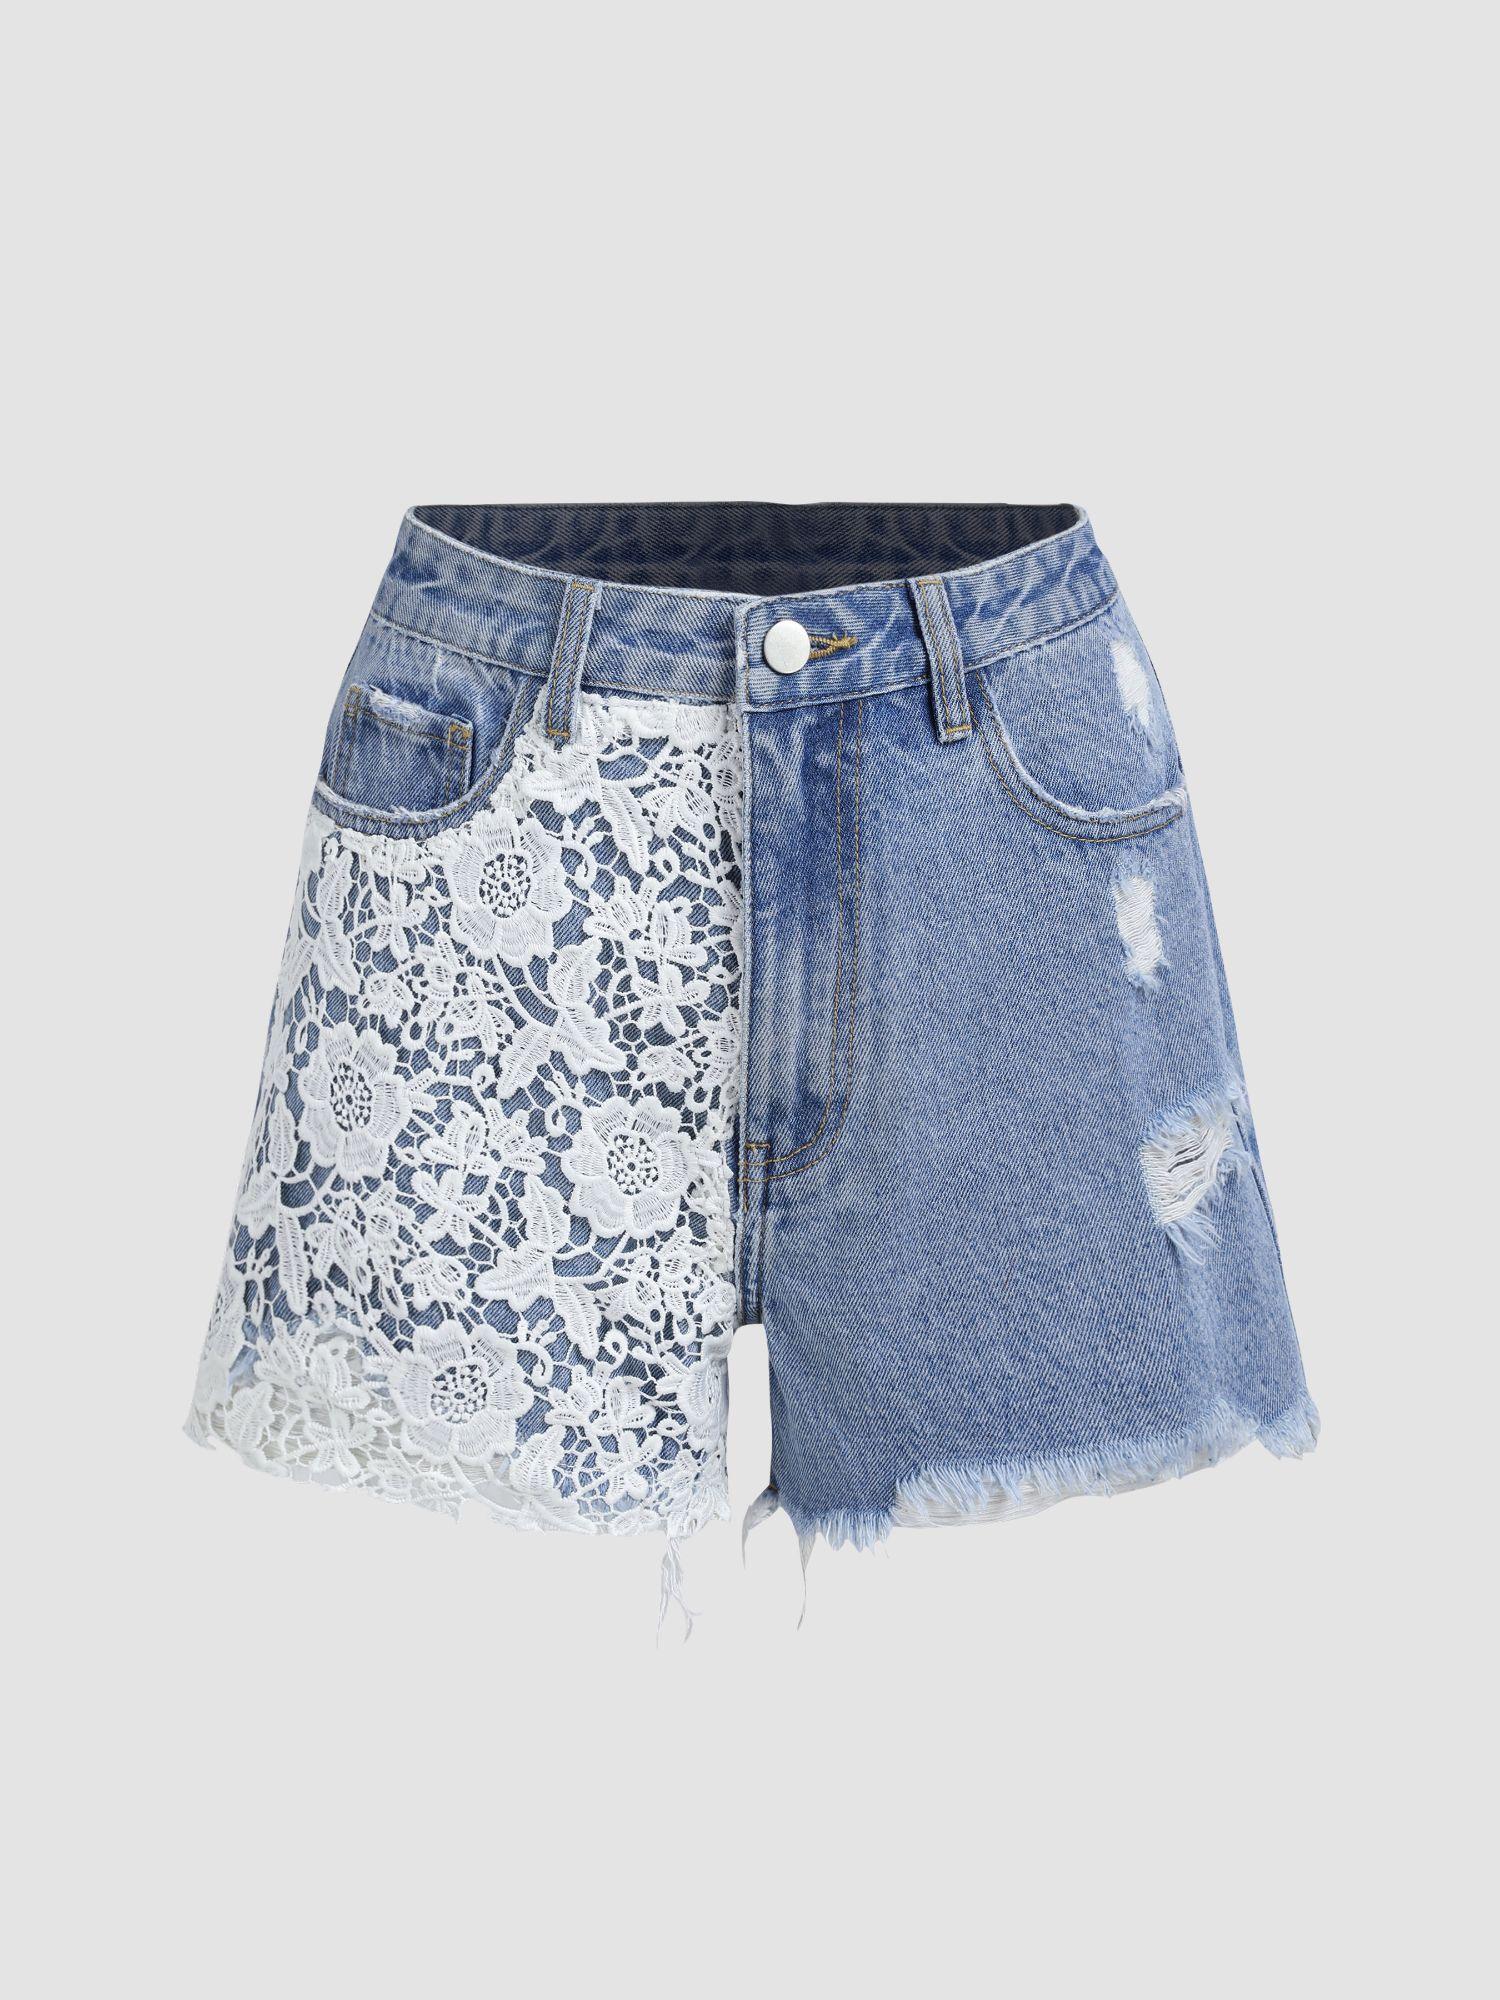 denim floral lace ripped shorts